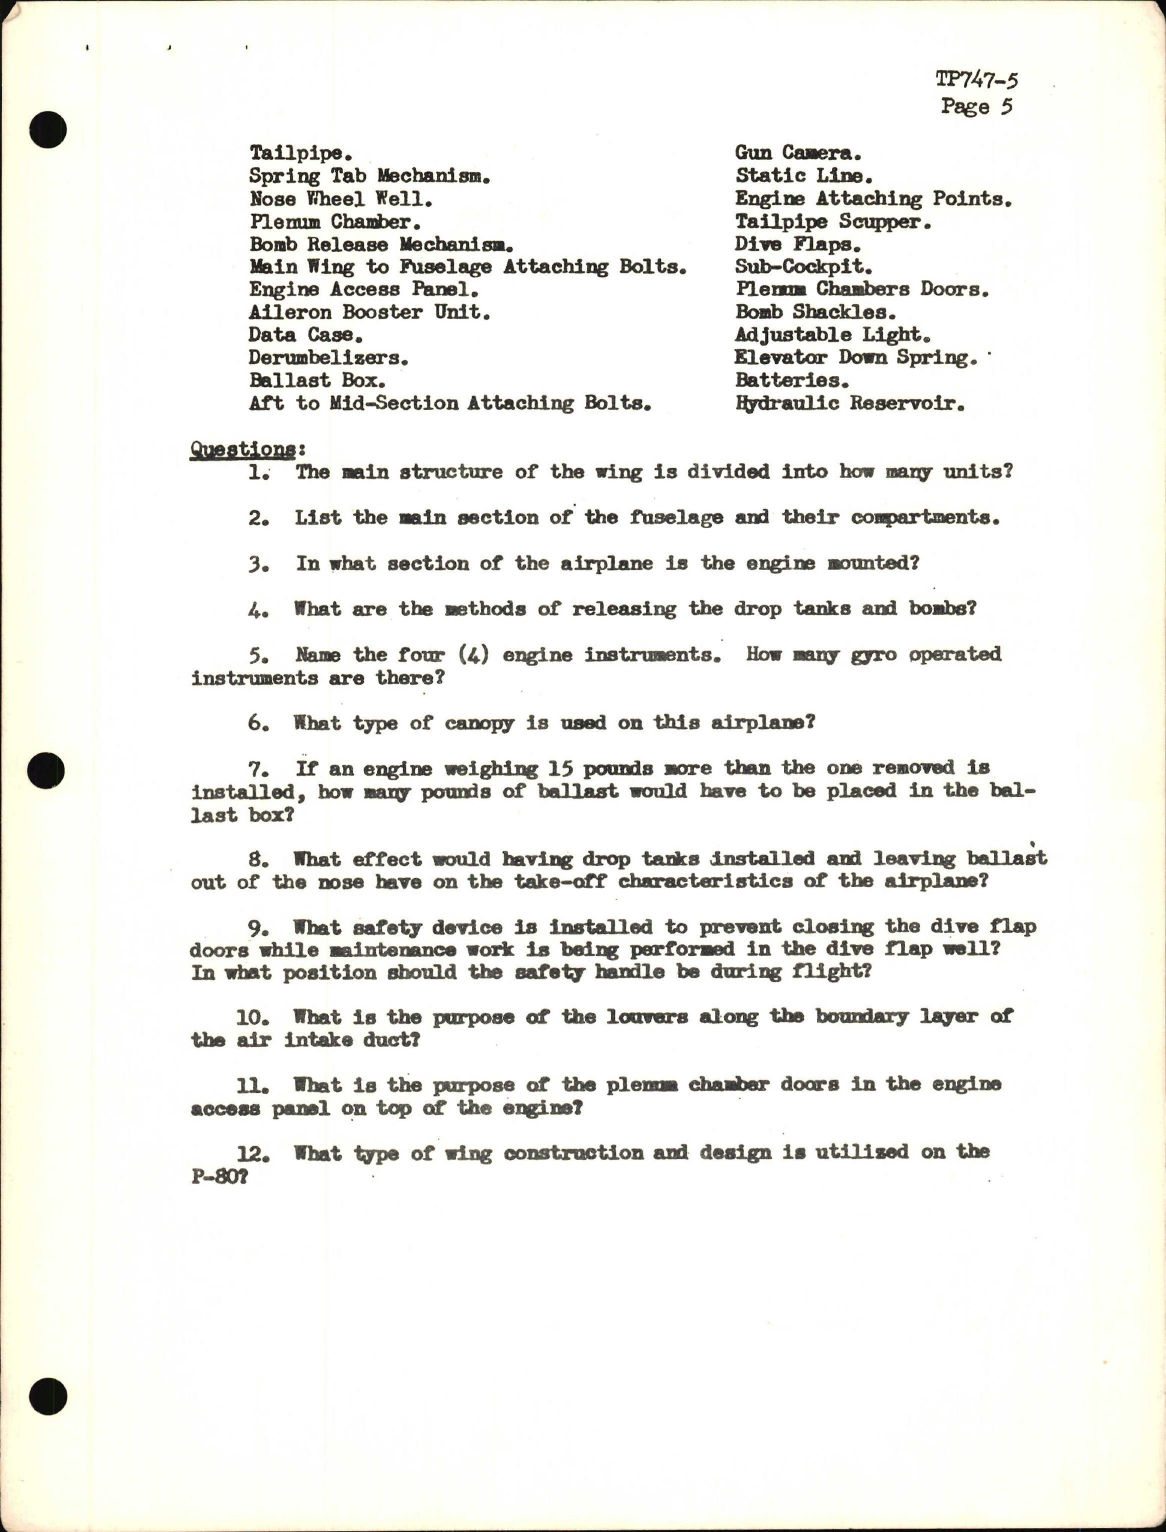 Sample page 5 from AirCorps Library document: Training Project, Brief Description of the Airplane